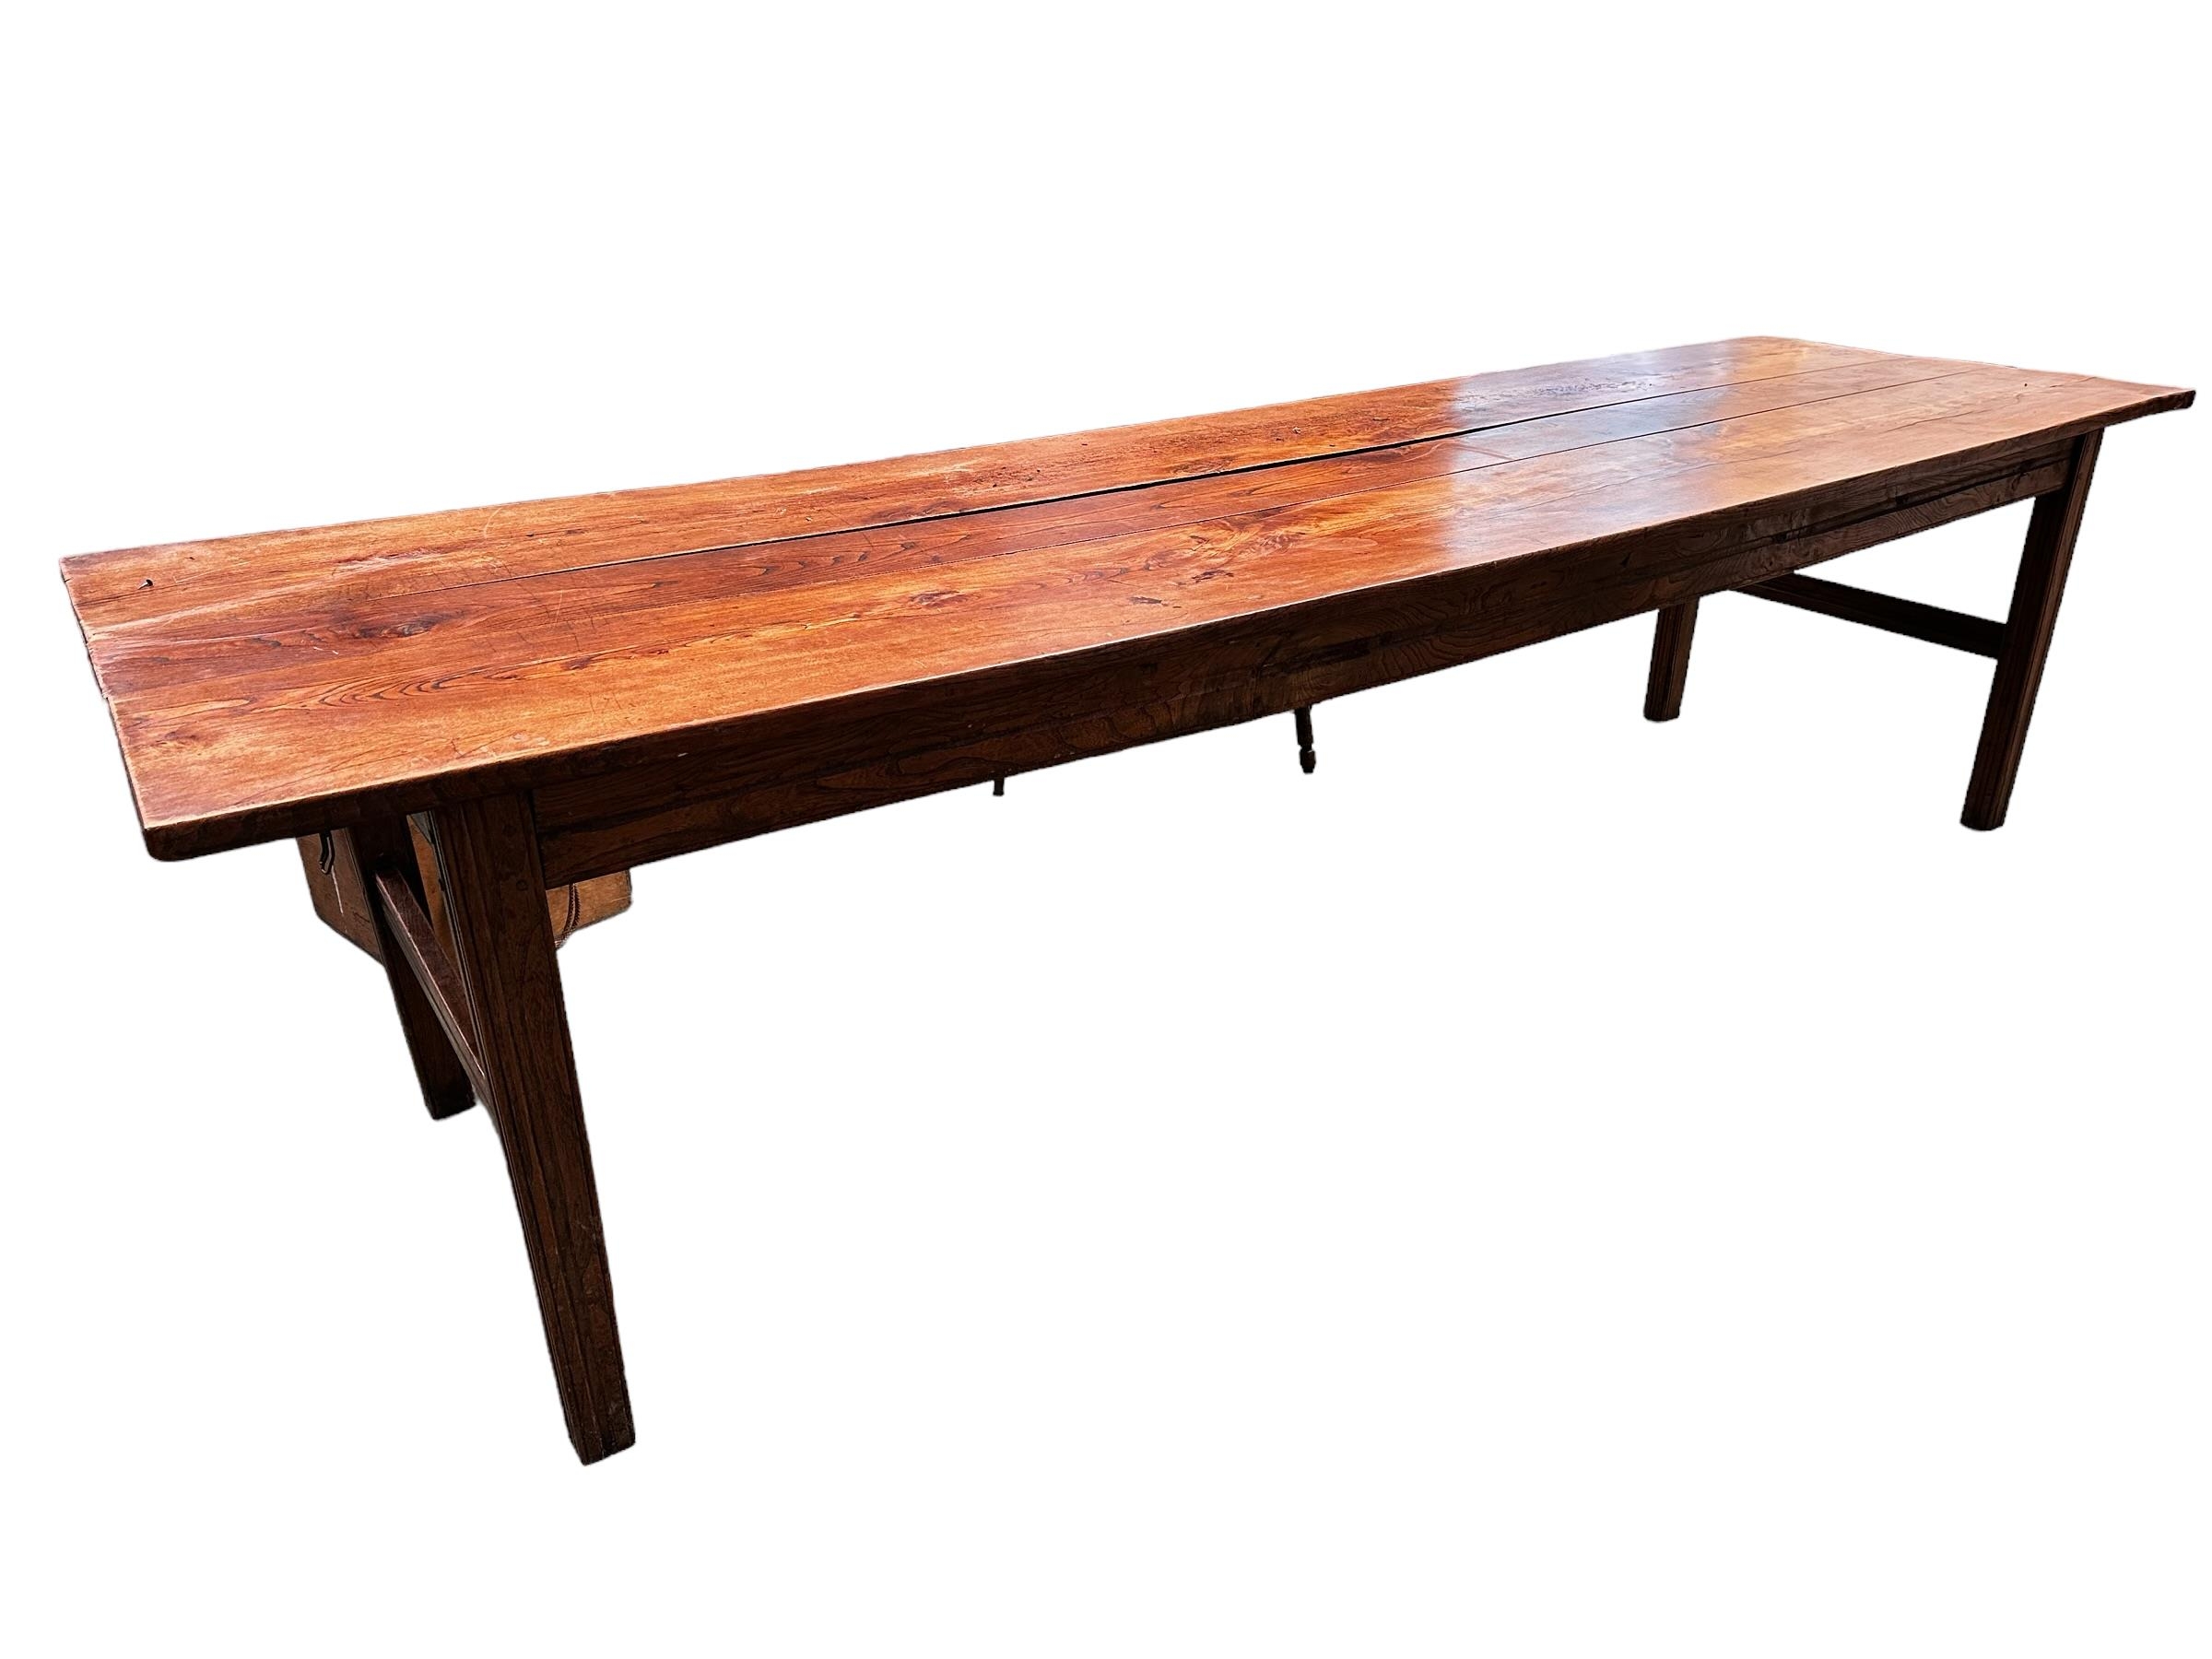 An C18th and later, French fruitwood refectory table, some wear and character, with much use, see - Image 3 of 3